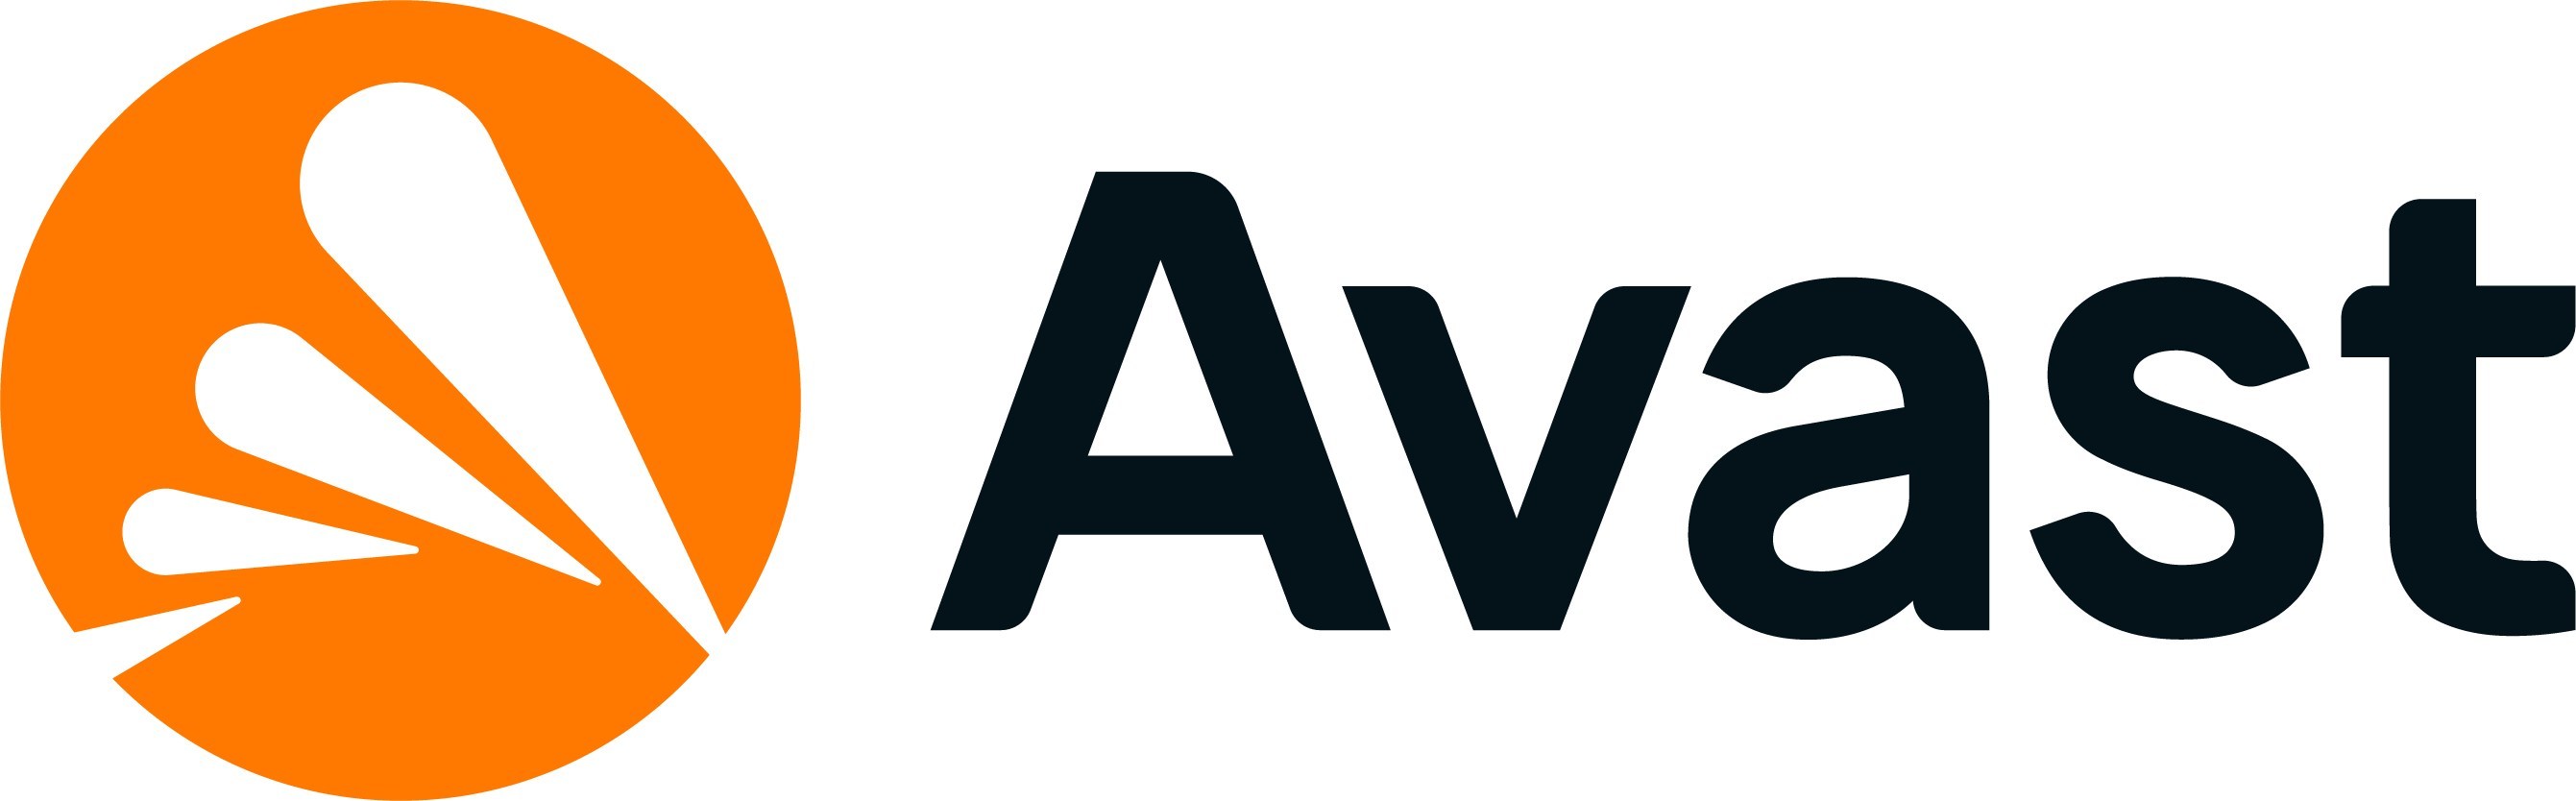 Avast new logo to be strictly only used from 16 September 2021 onwards (PRNewsfoto/Avast Software, Inc.)